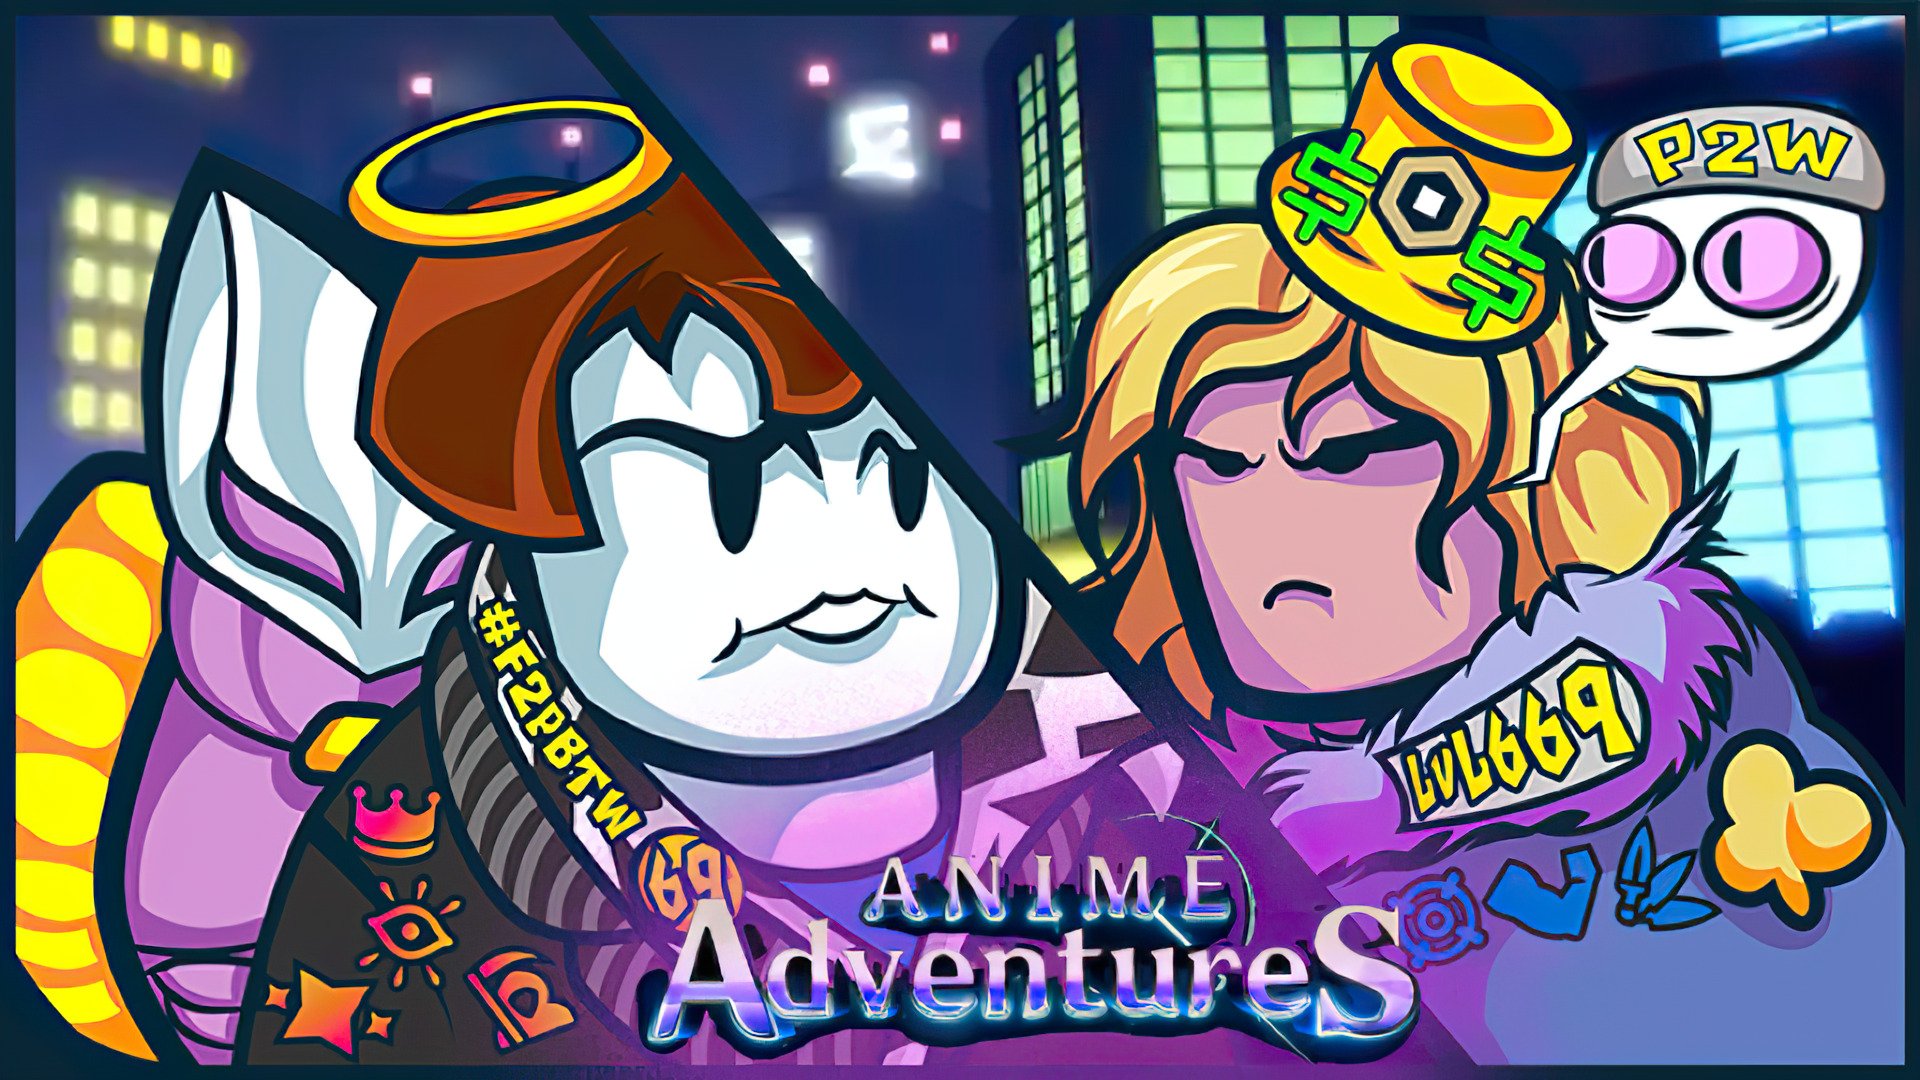 Anime Adventures - Halloween update patch notes and code